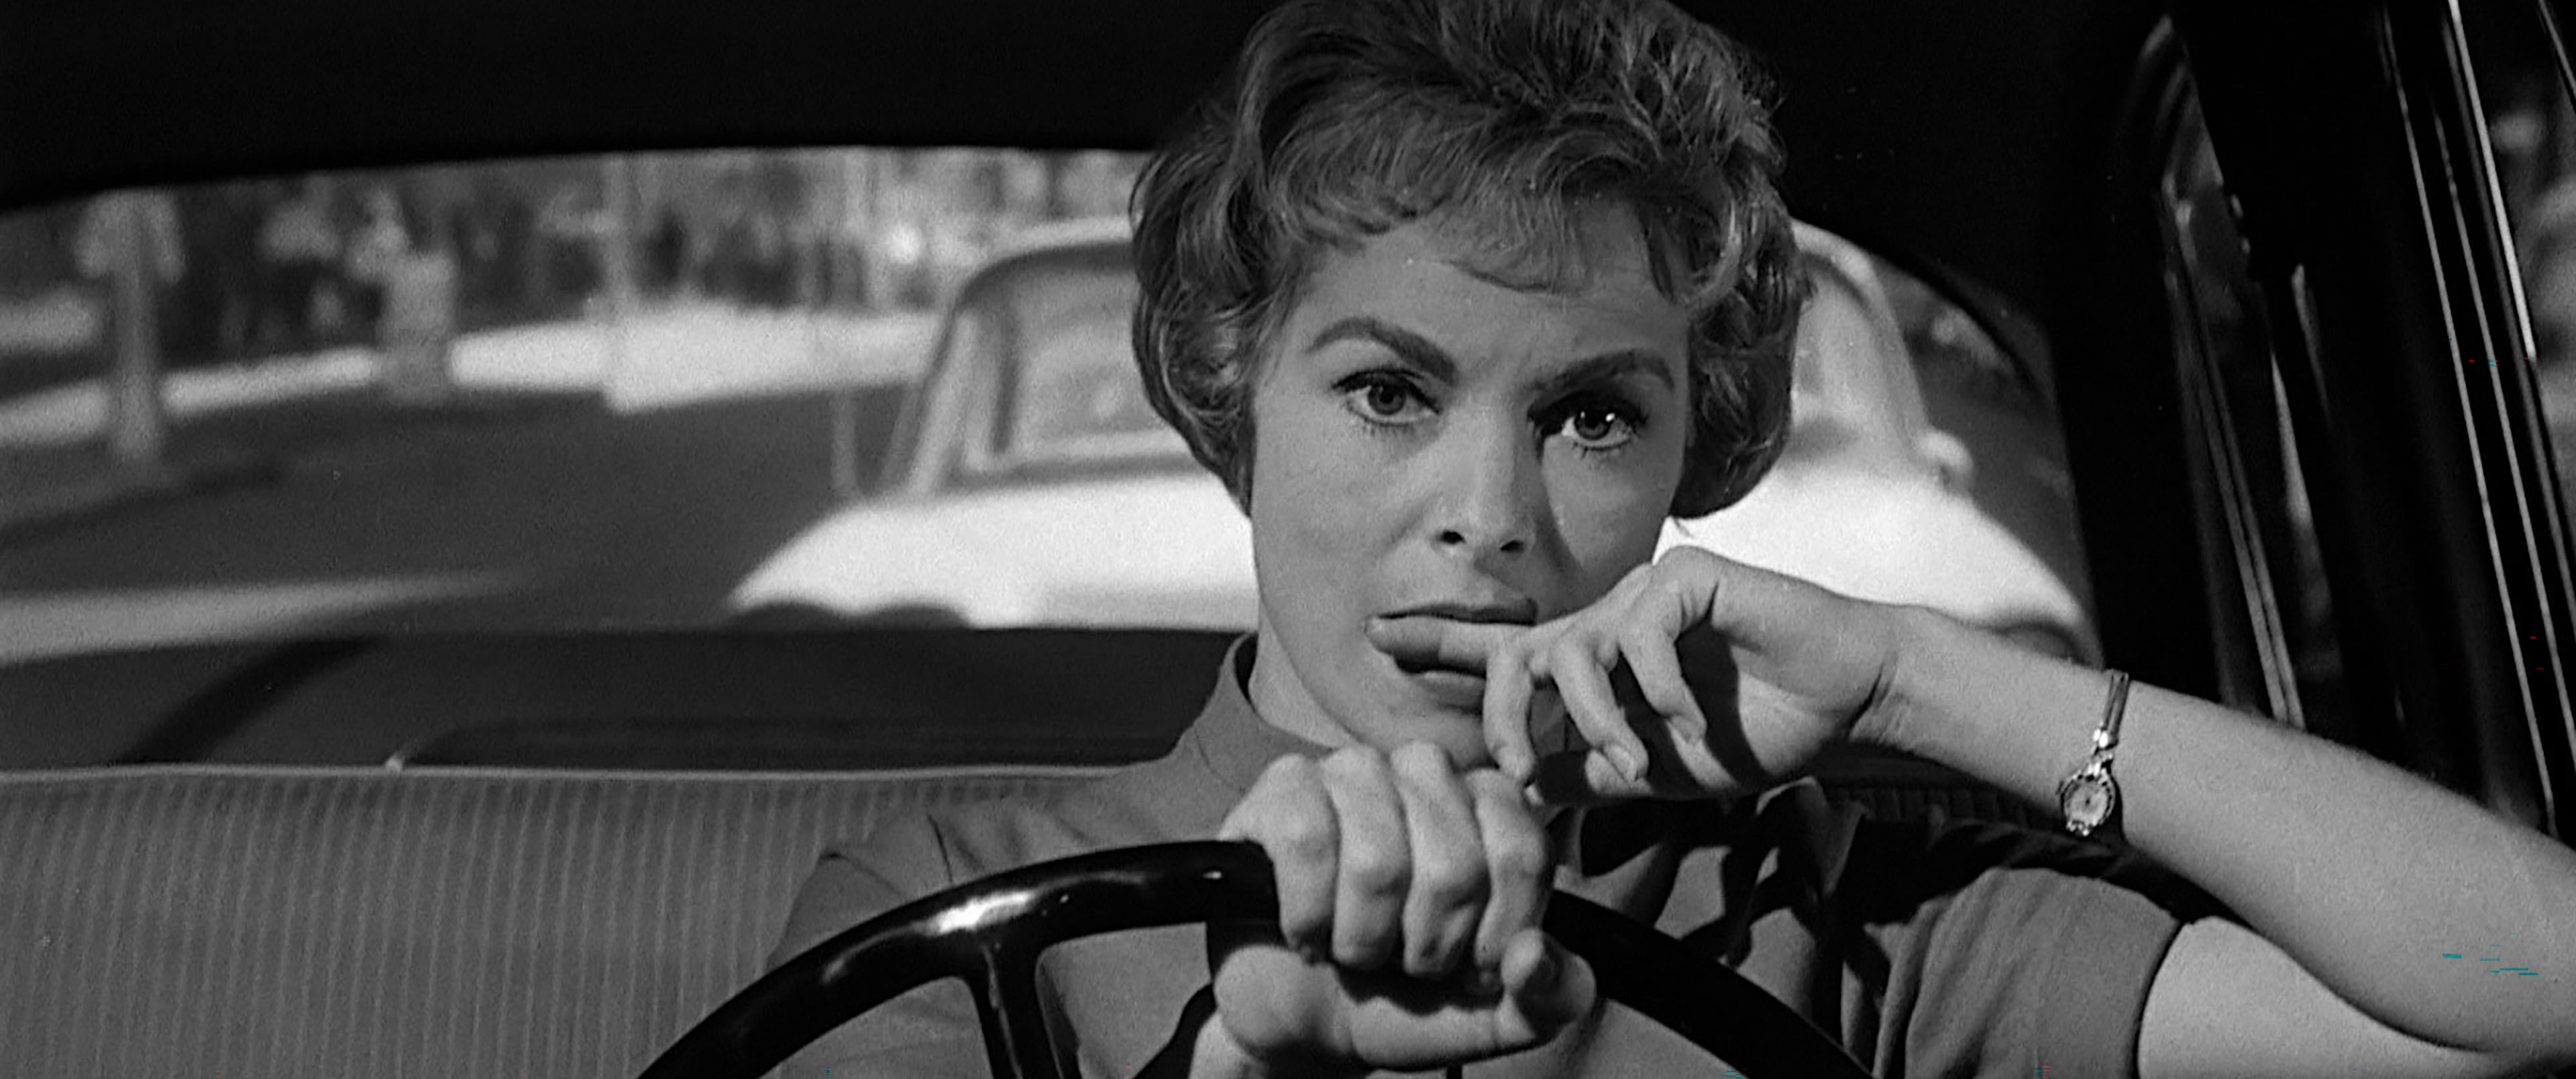 Still image from Psycho. Janet Leigh bites her finger as she drives, with a worried expression on her face.